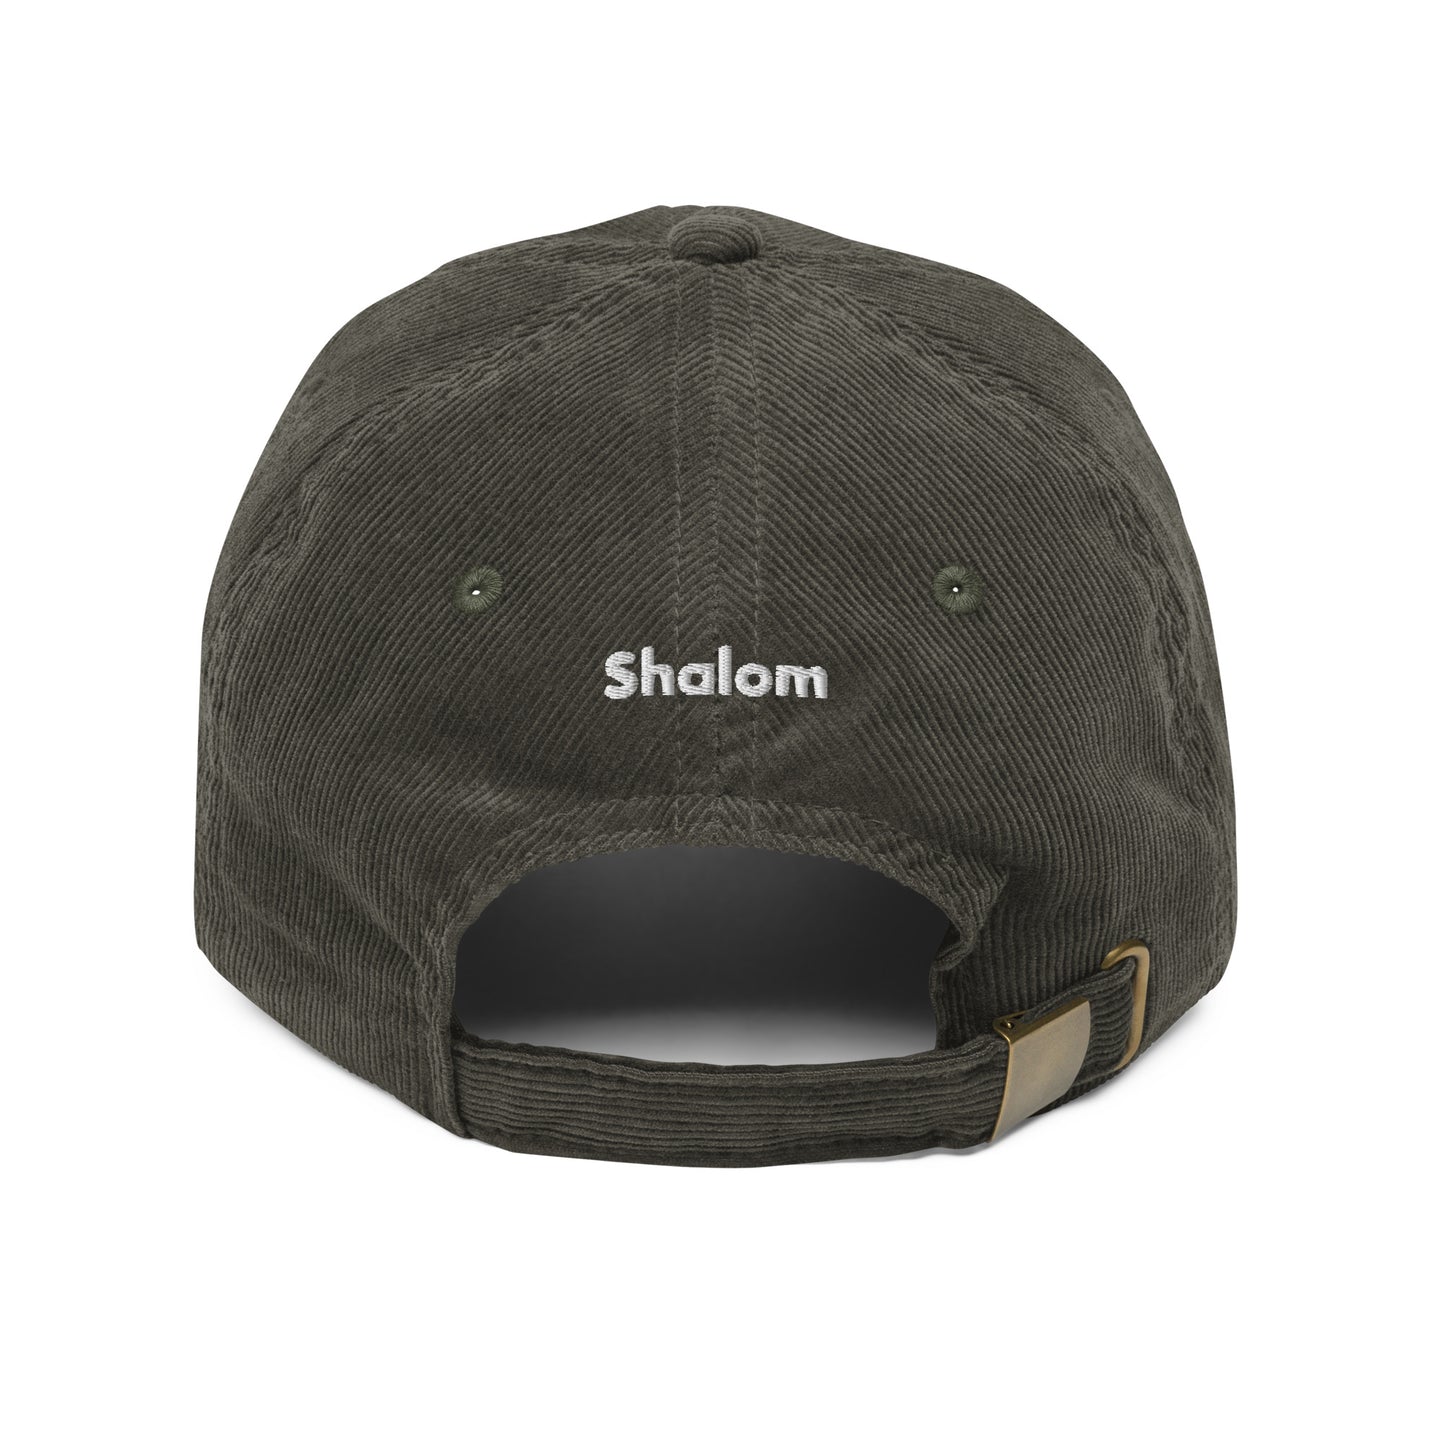 Hi Shalom Hebrew Corduroy Hat by Happy interactions in Green